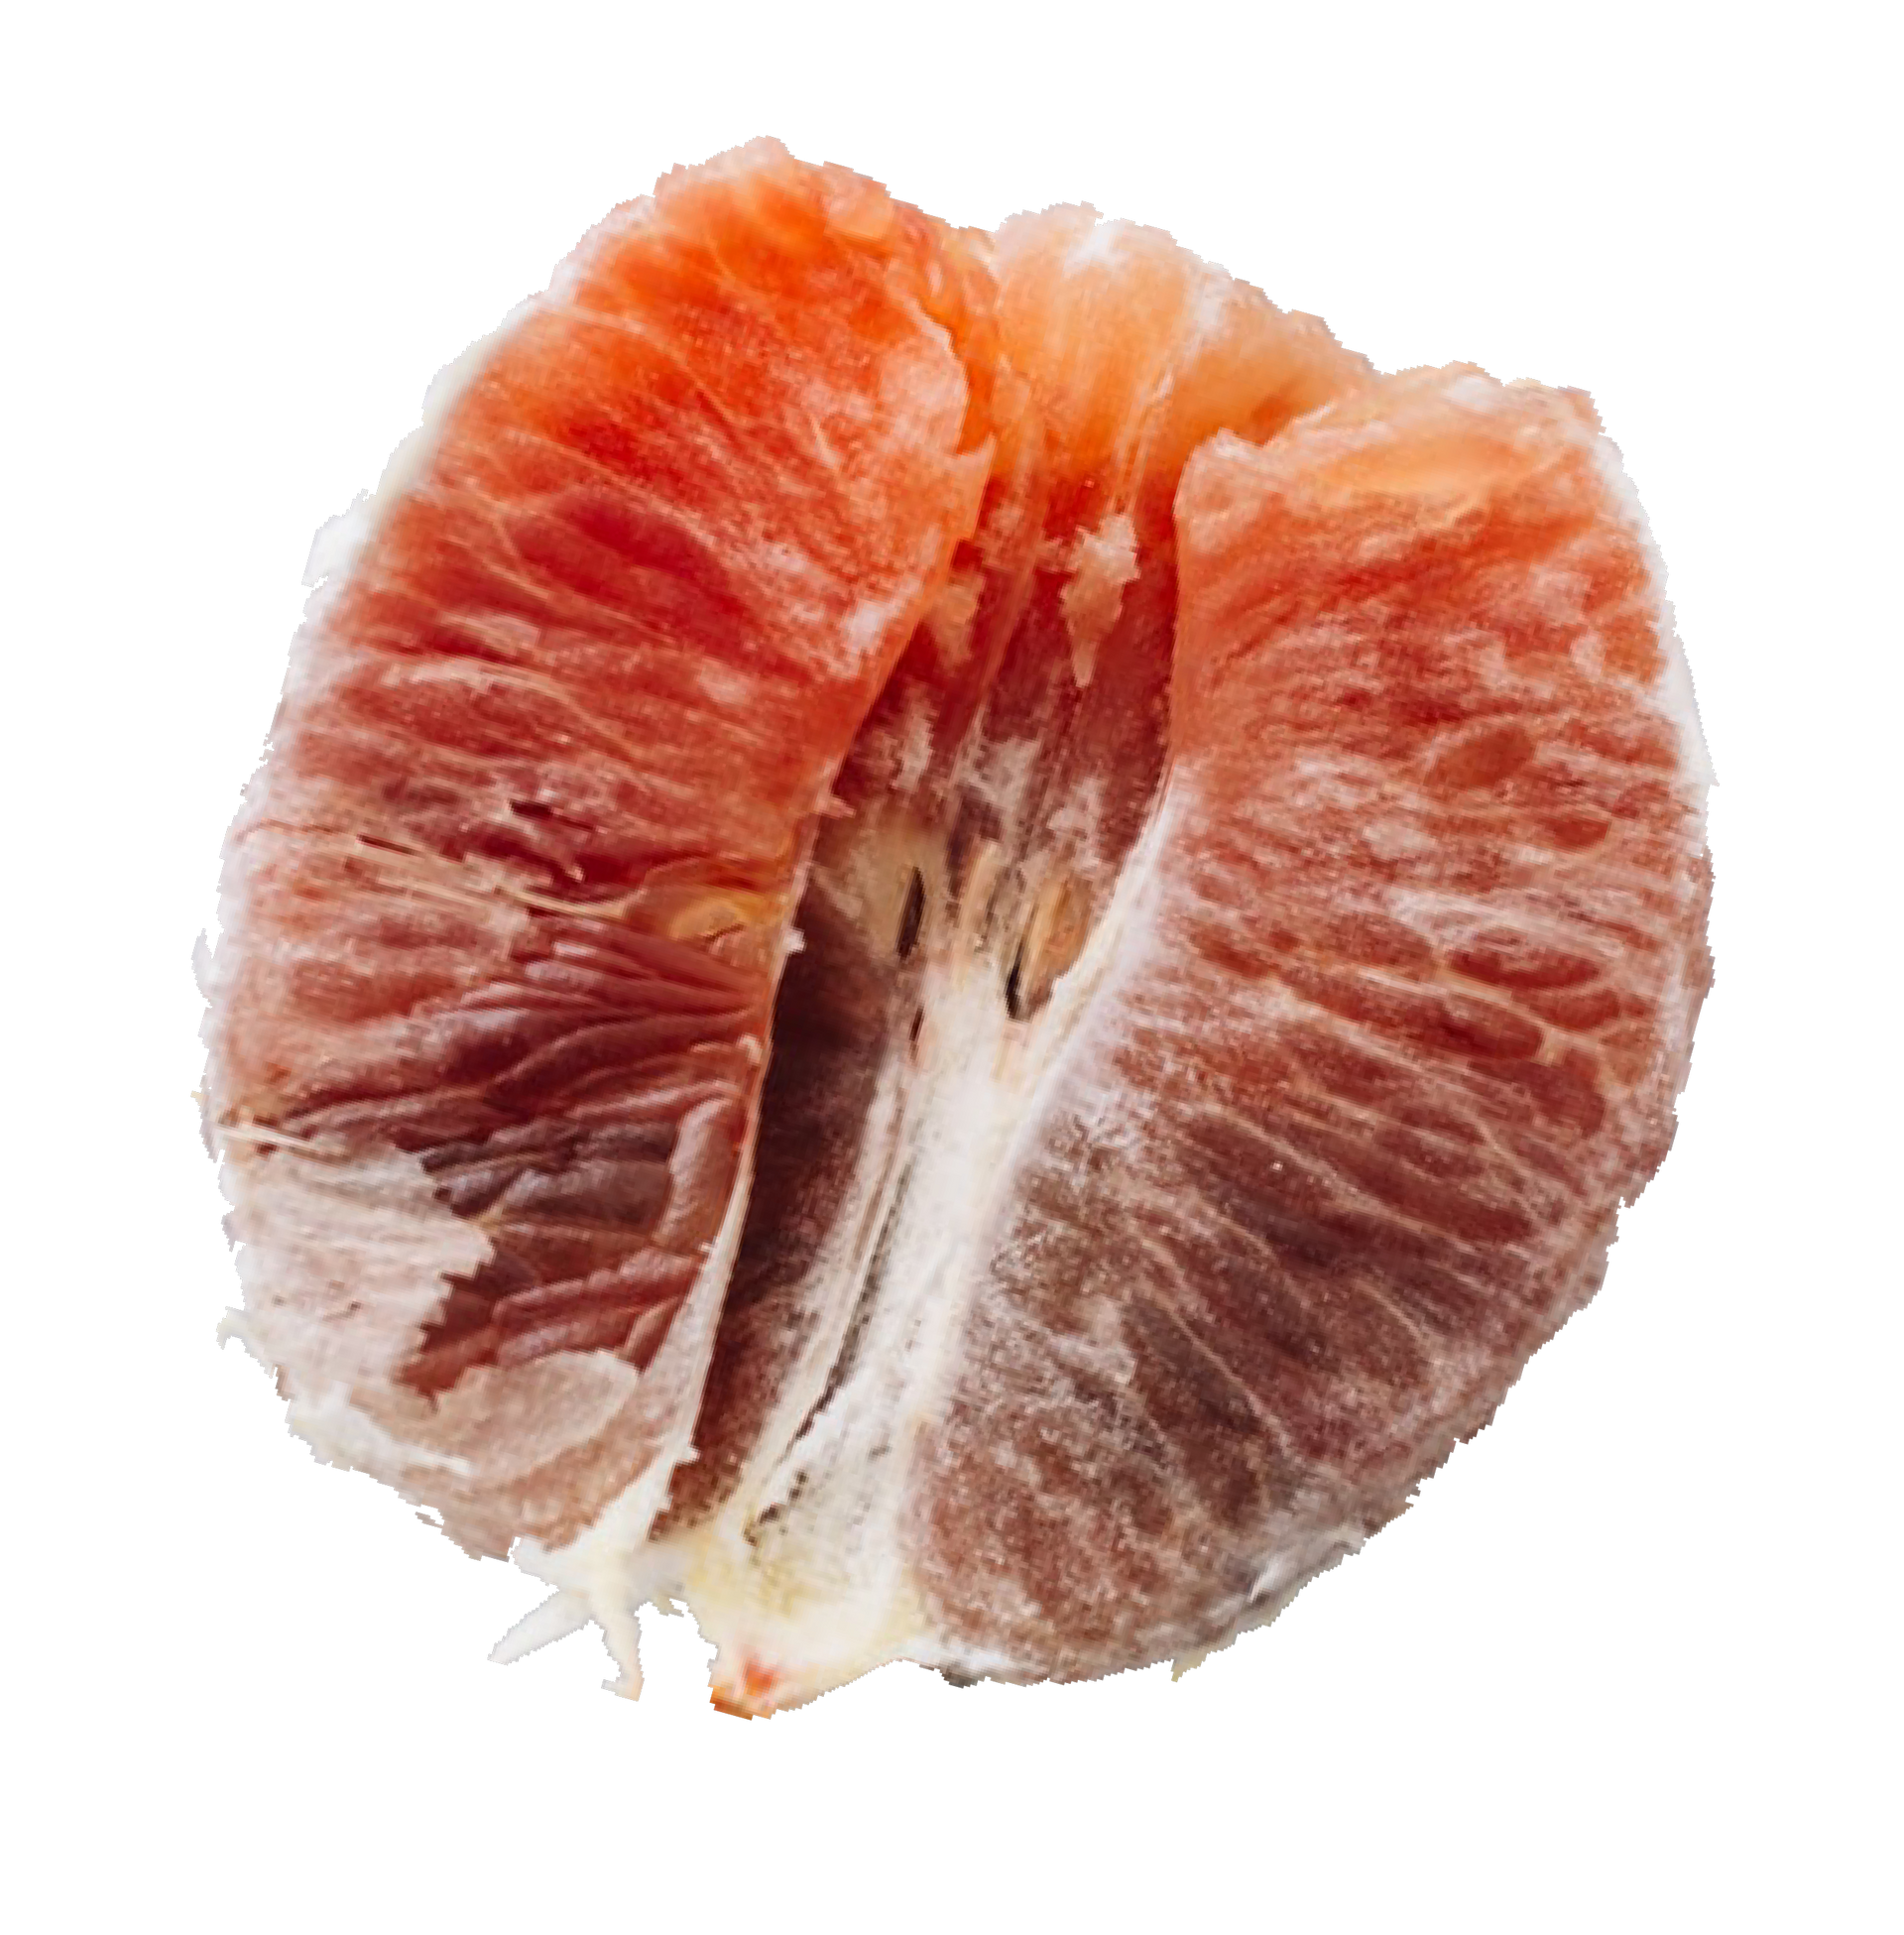 A close up of a grapefruit cut in half on a white background.